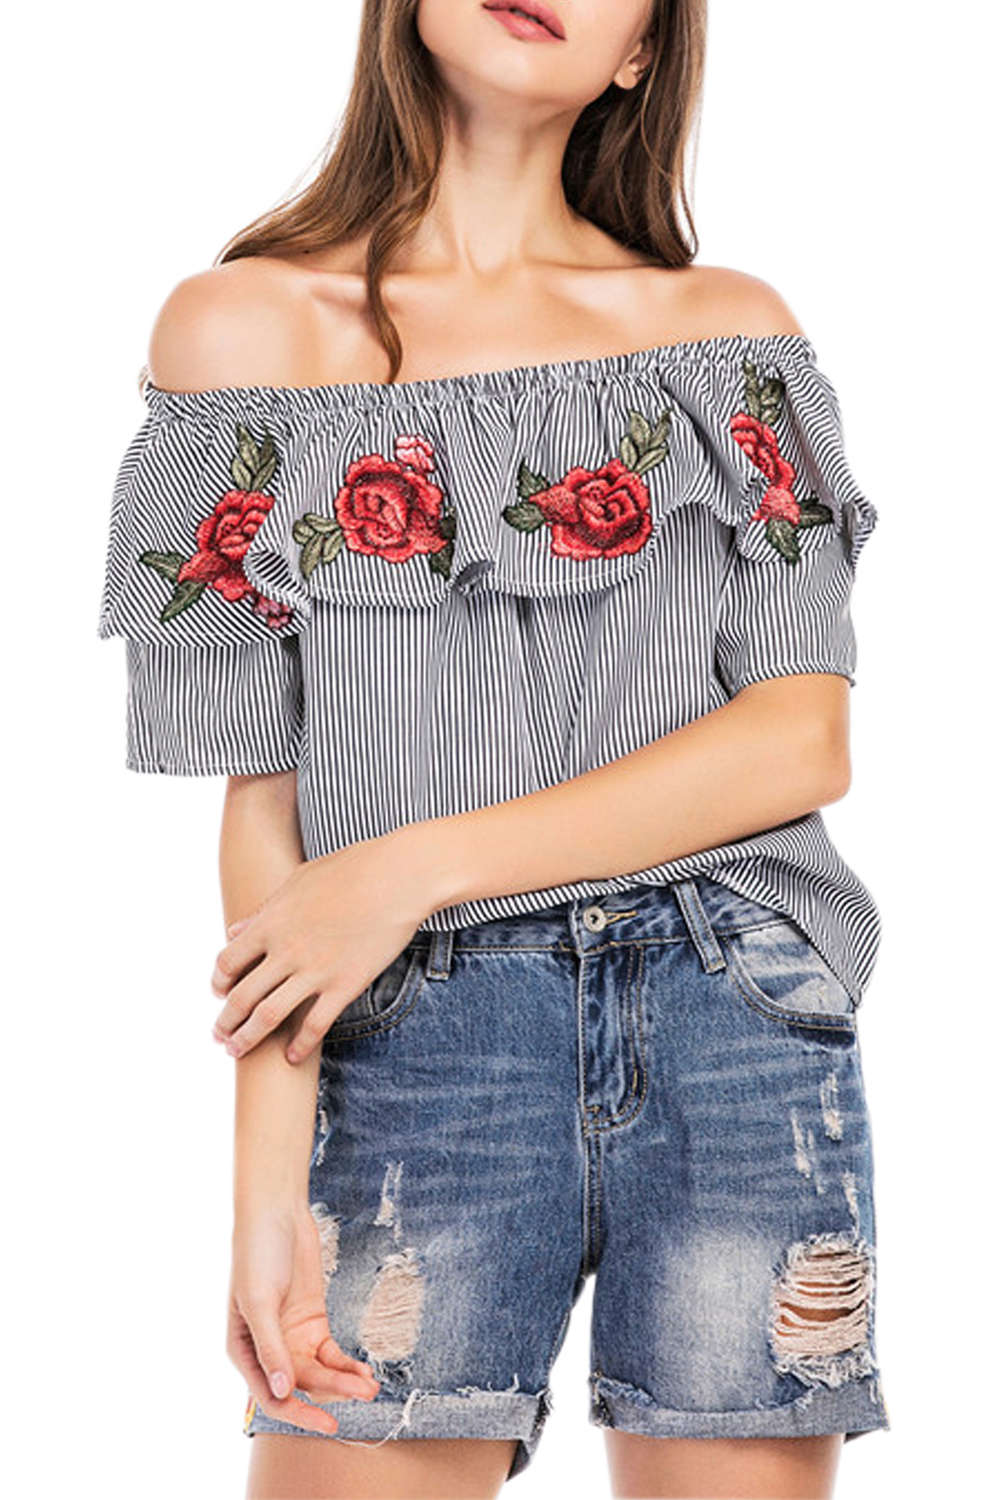 Iyasson Women Striped Off Shoulder Rose Embroidery Top